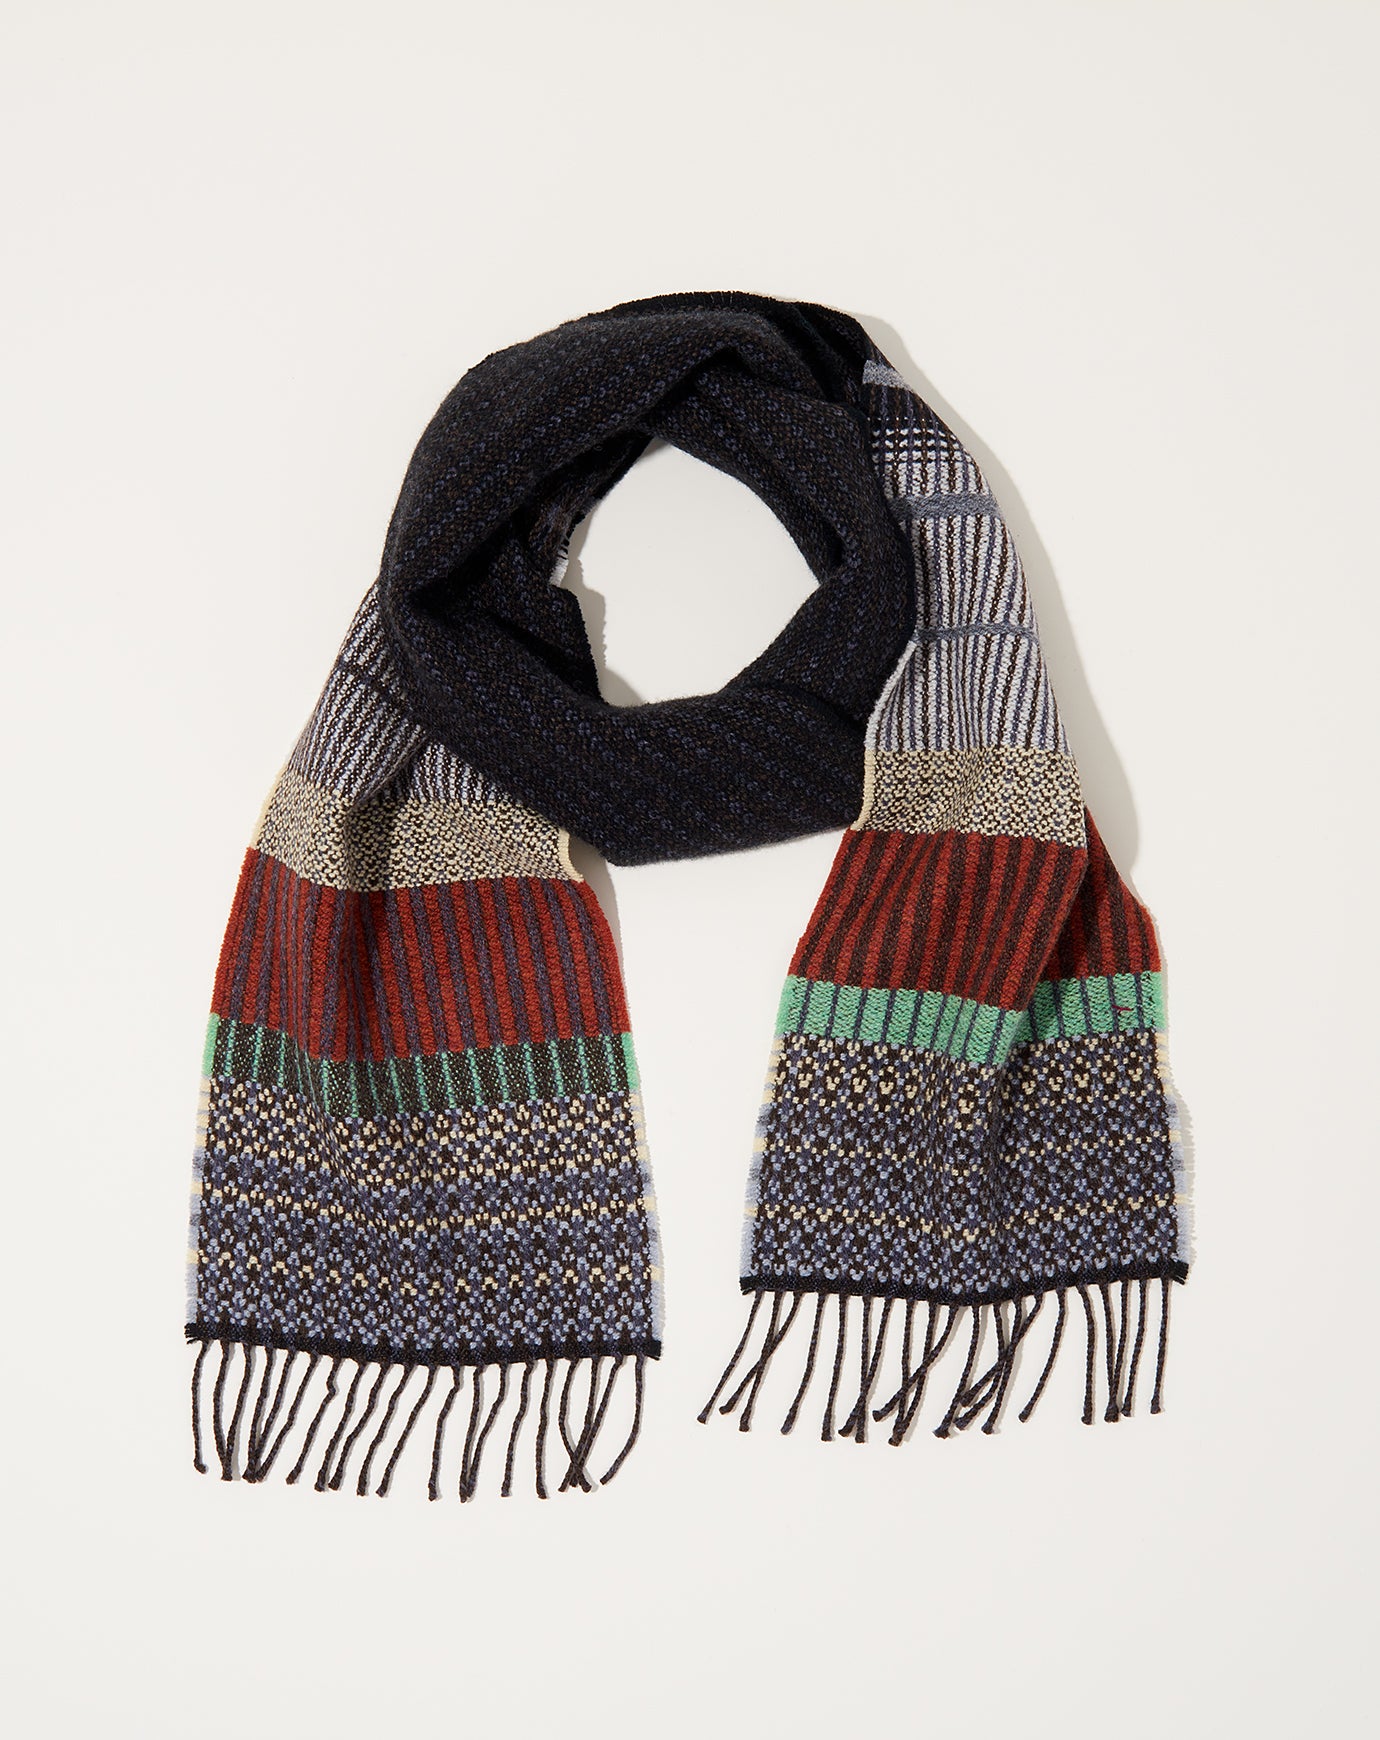 Wallace Sewell Anouilh Diffusion Scarf in Black